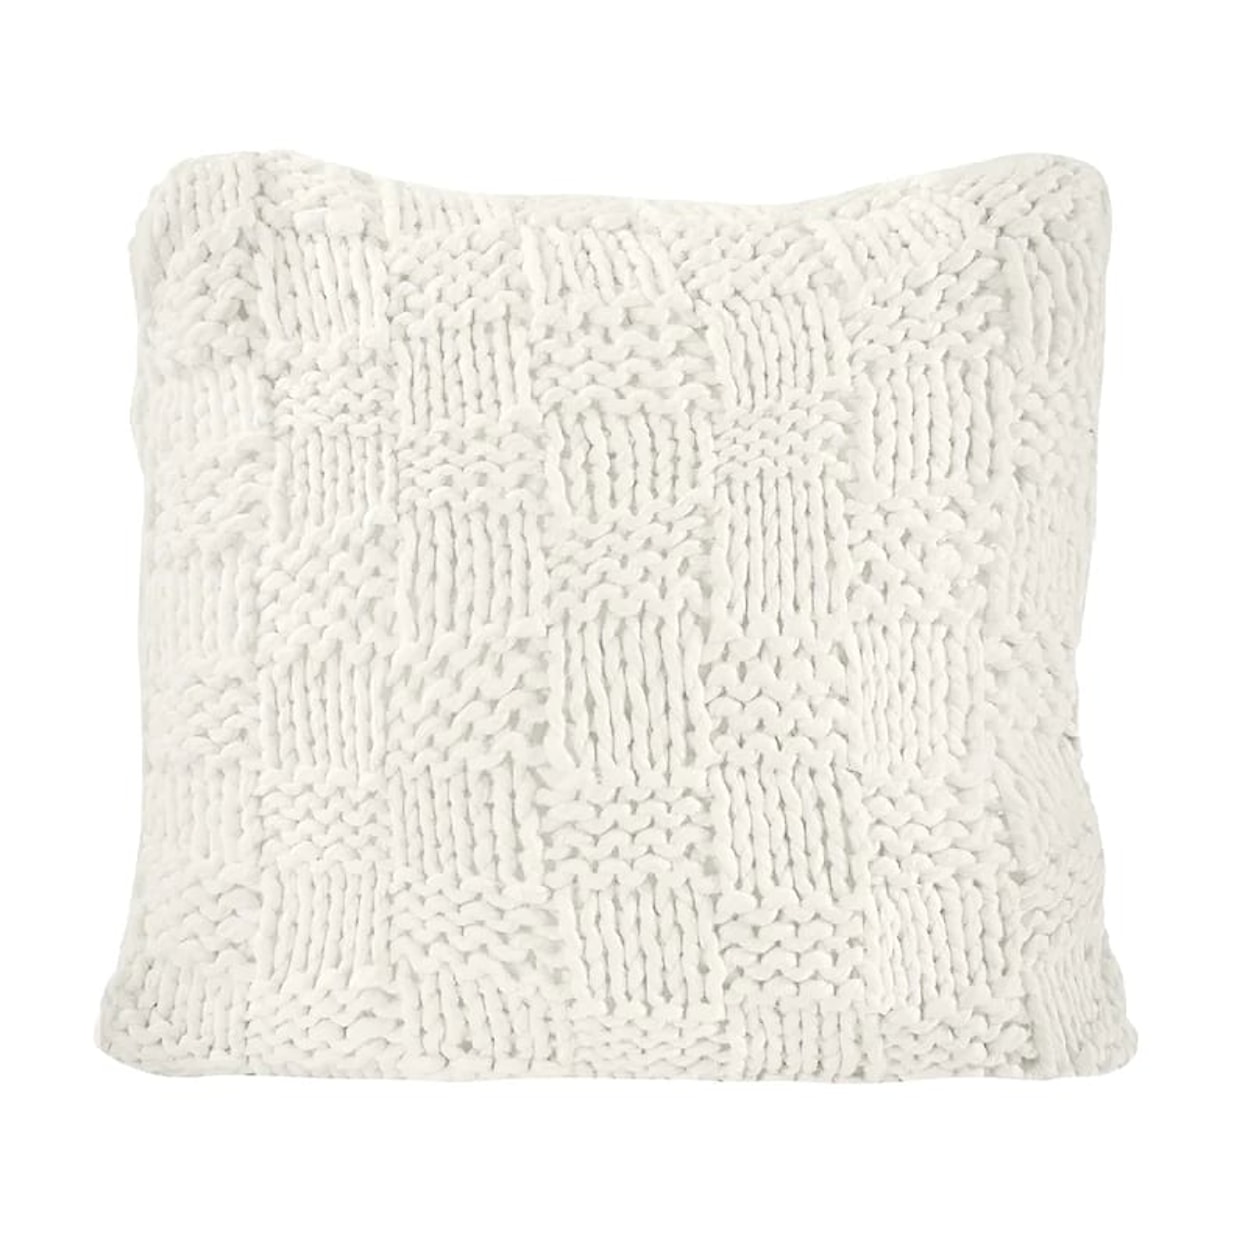 HiEnd Accents Parade CHESS KNIT NATURAL PILLOW 27" X 27"